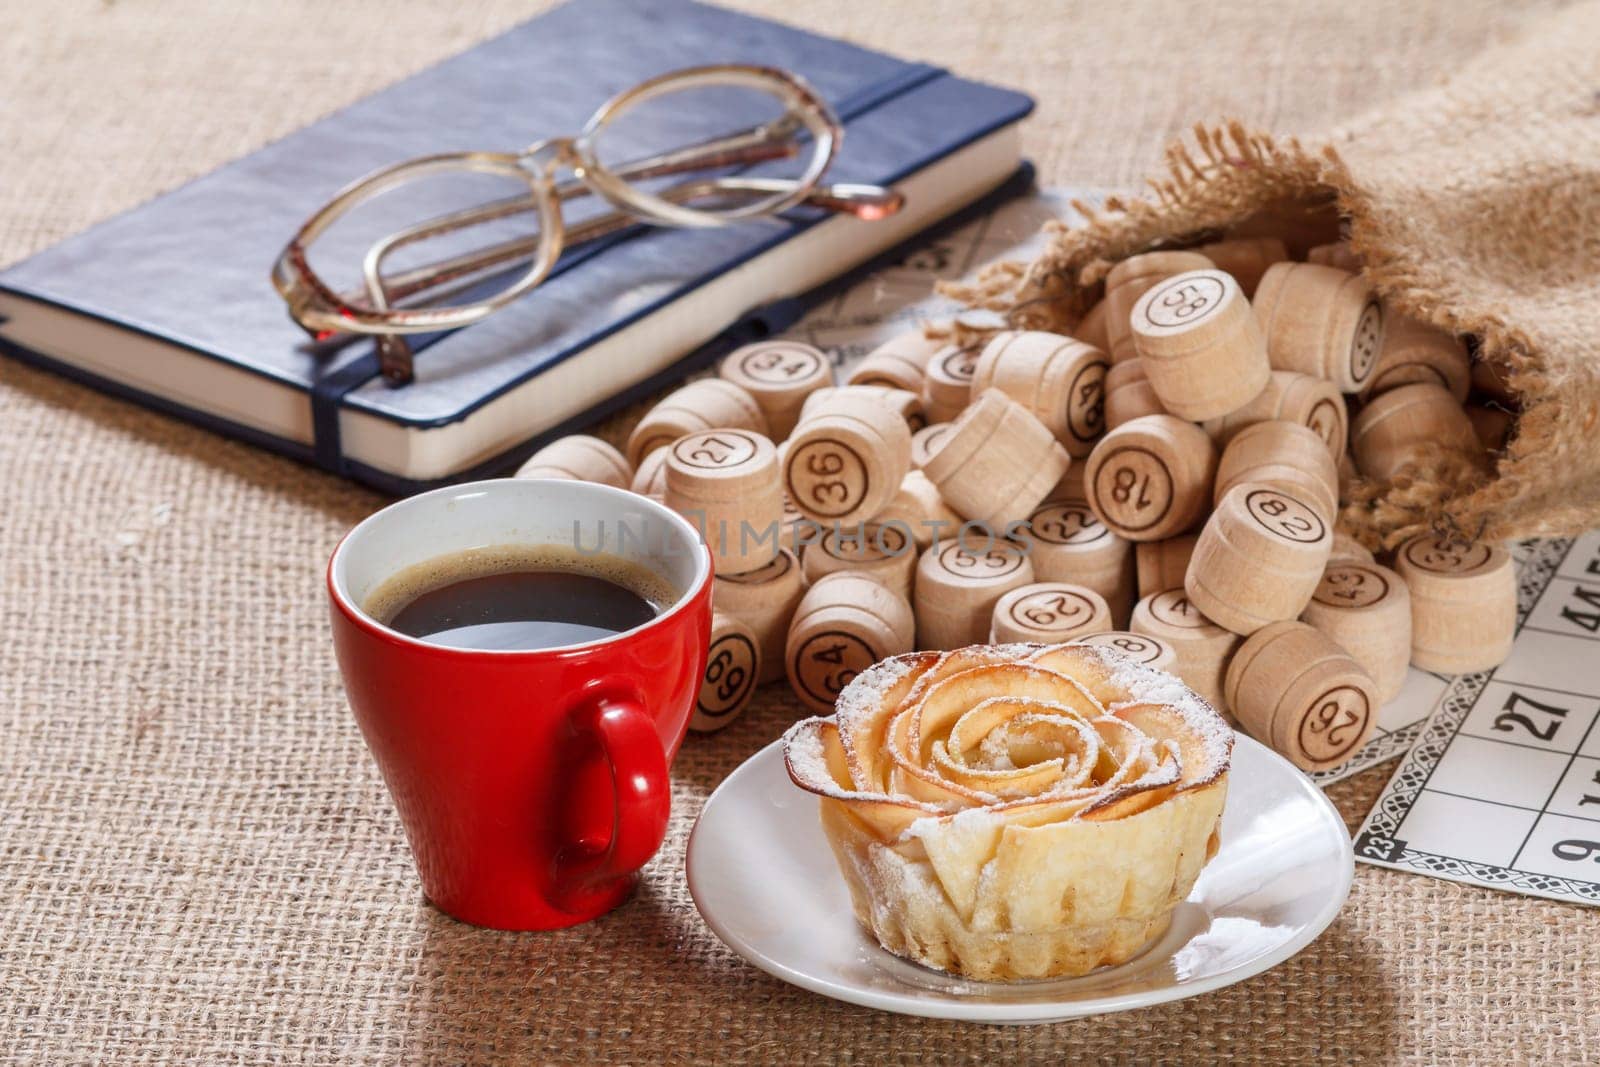 Wooden lotto barrels in bag and game cards with notebook, glasses, cup of coffee and homemade cookie on plate. by mvg6894